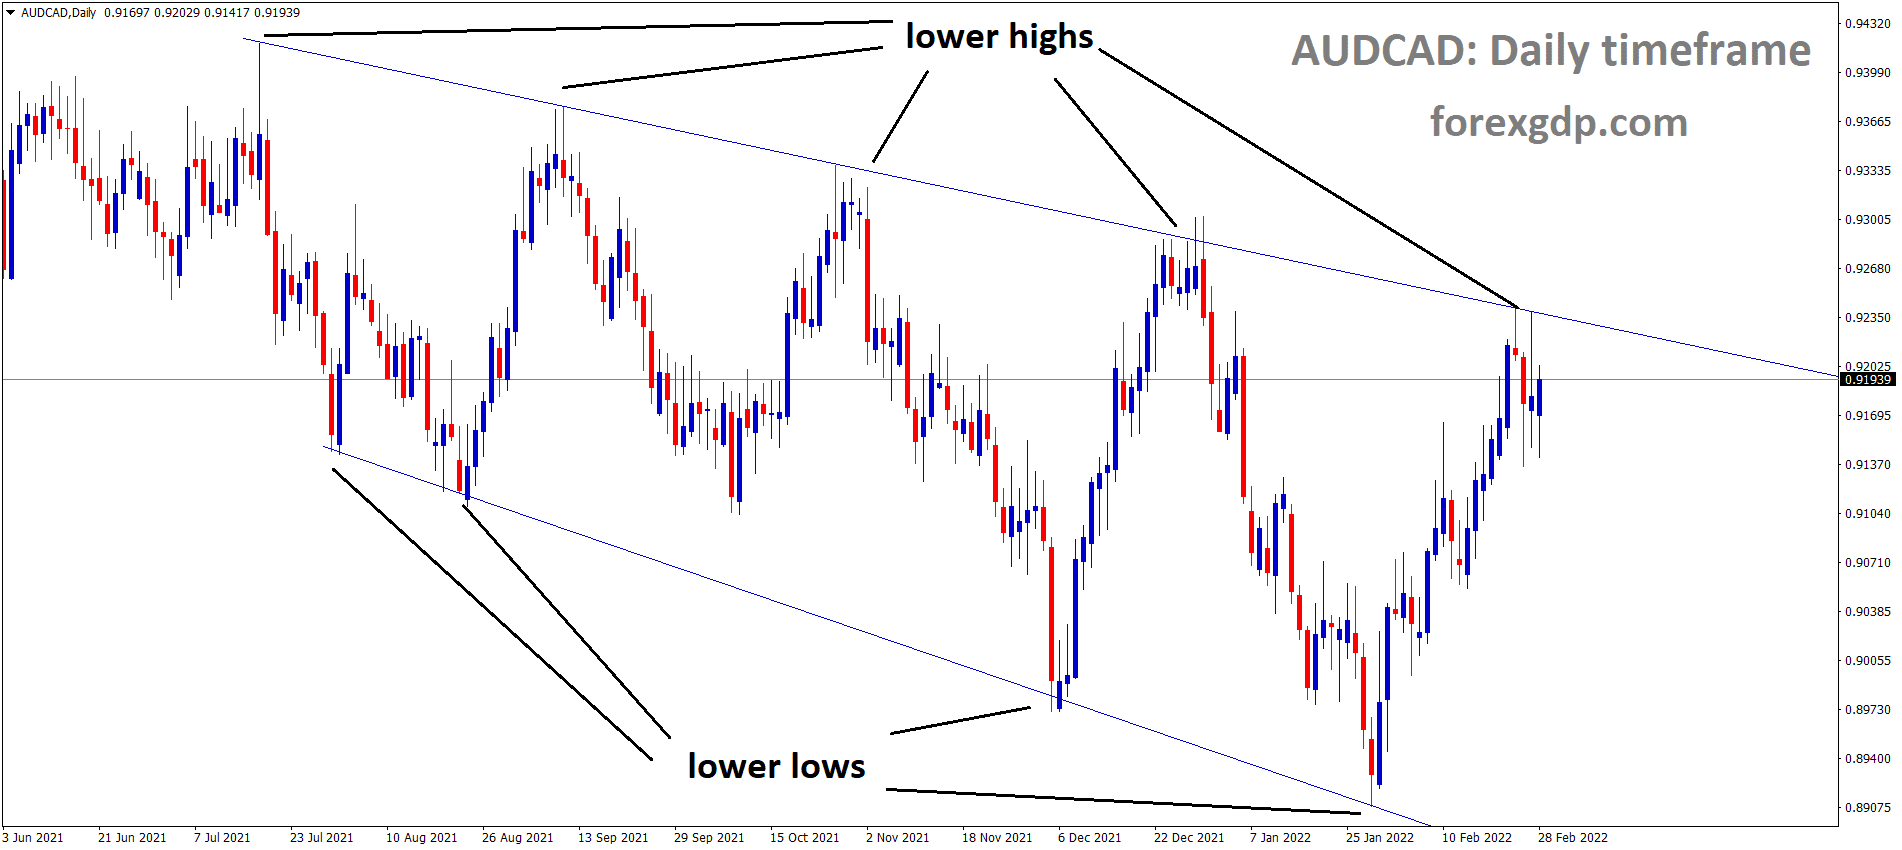 AUDCAD is moving in the Descending channel and the market has fallen from the lower high area of the channel.